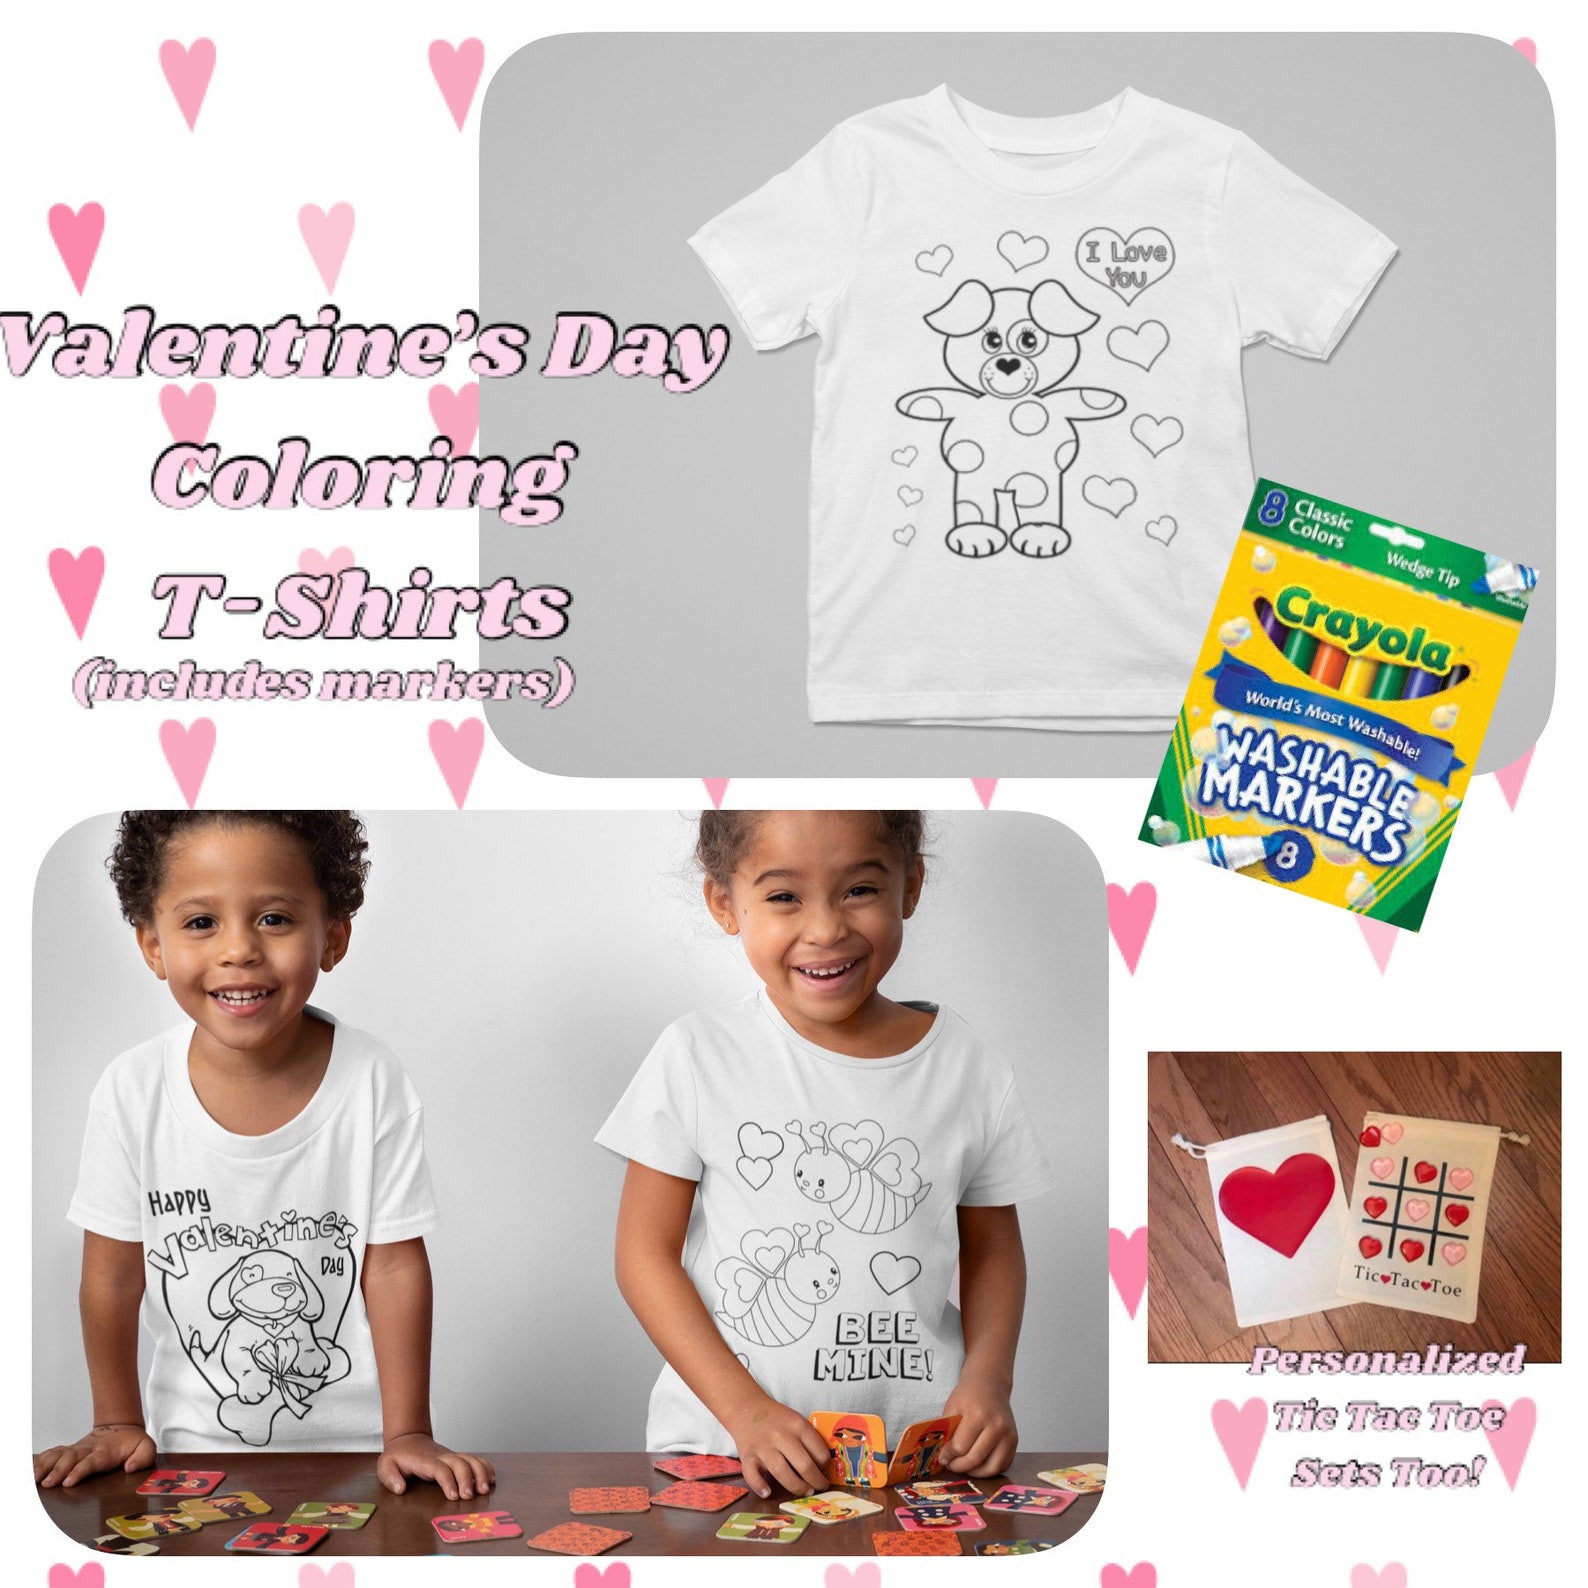 Valentines Day Coloring T-shirts - Etsy